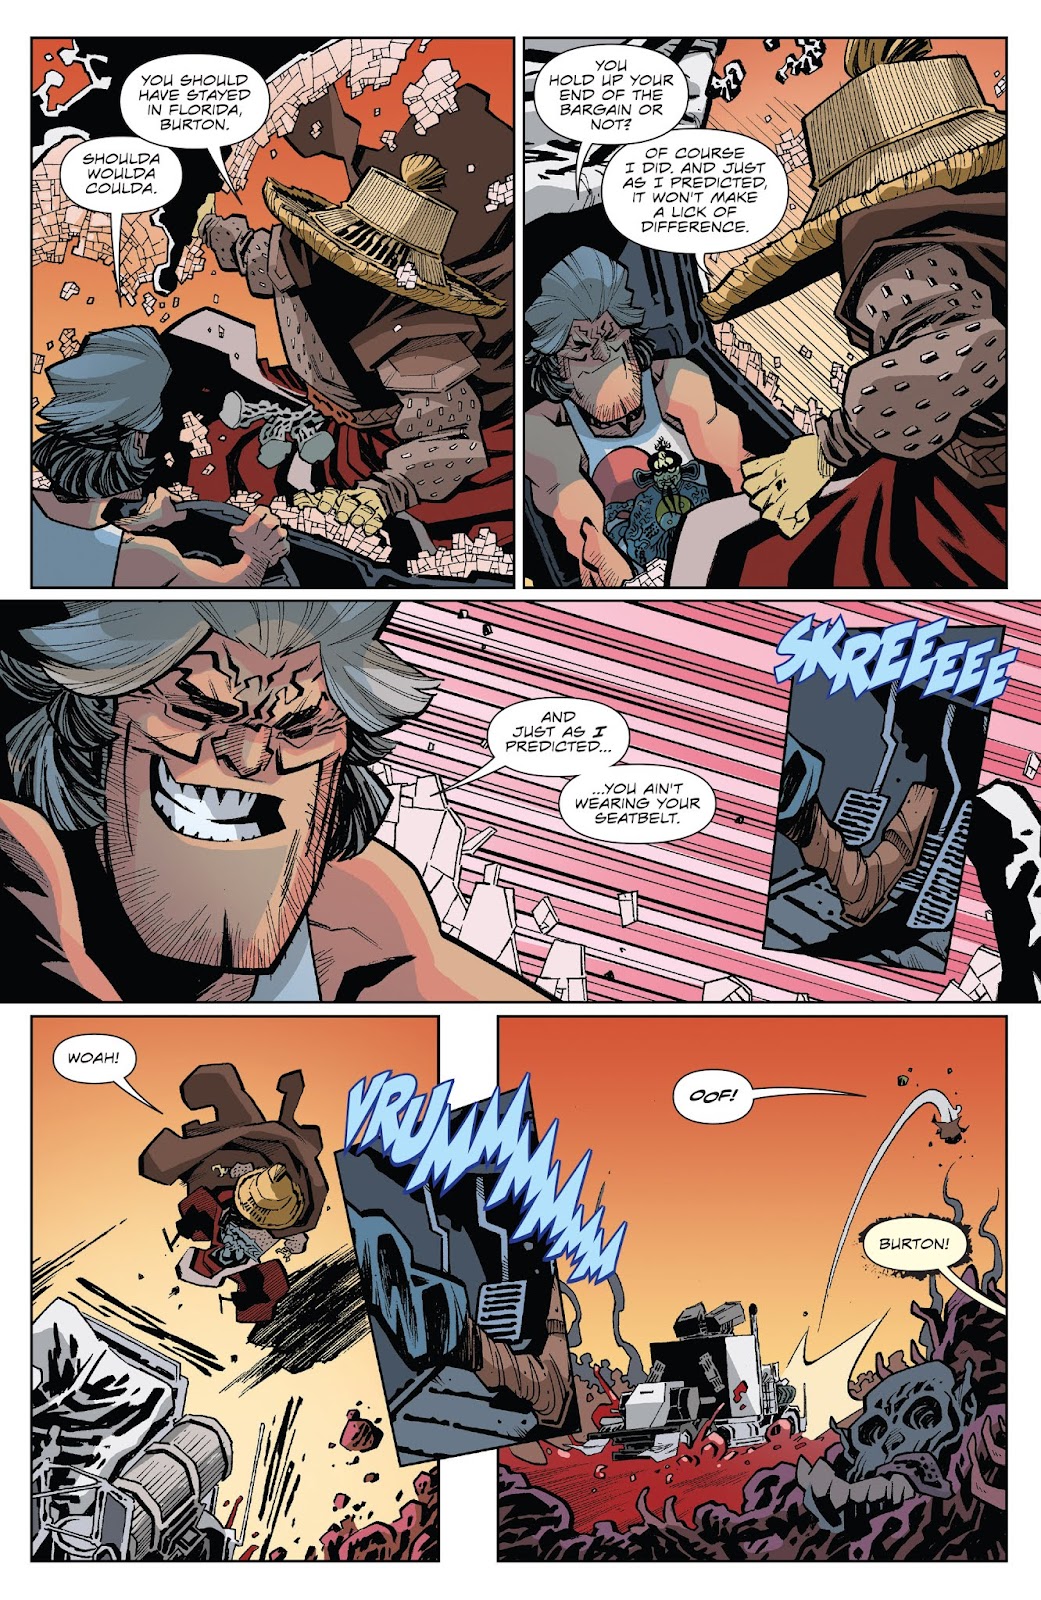 Big Trouble in Little China: Old Man Jack issue 11 - Page 17